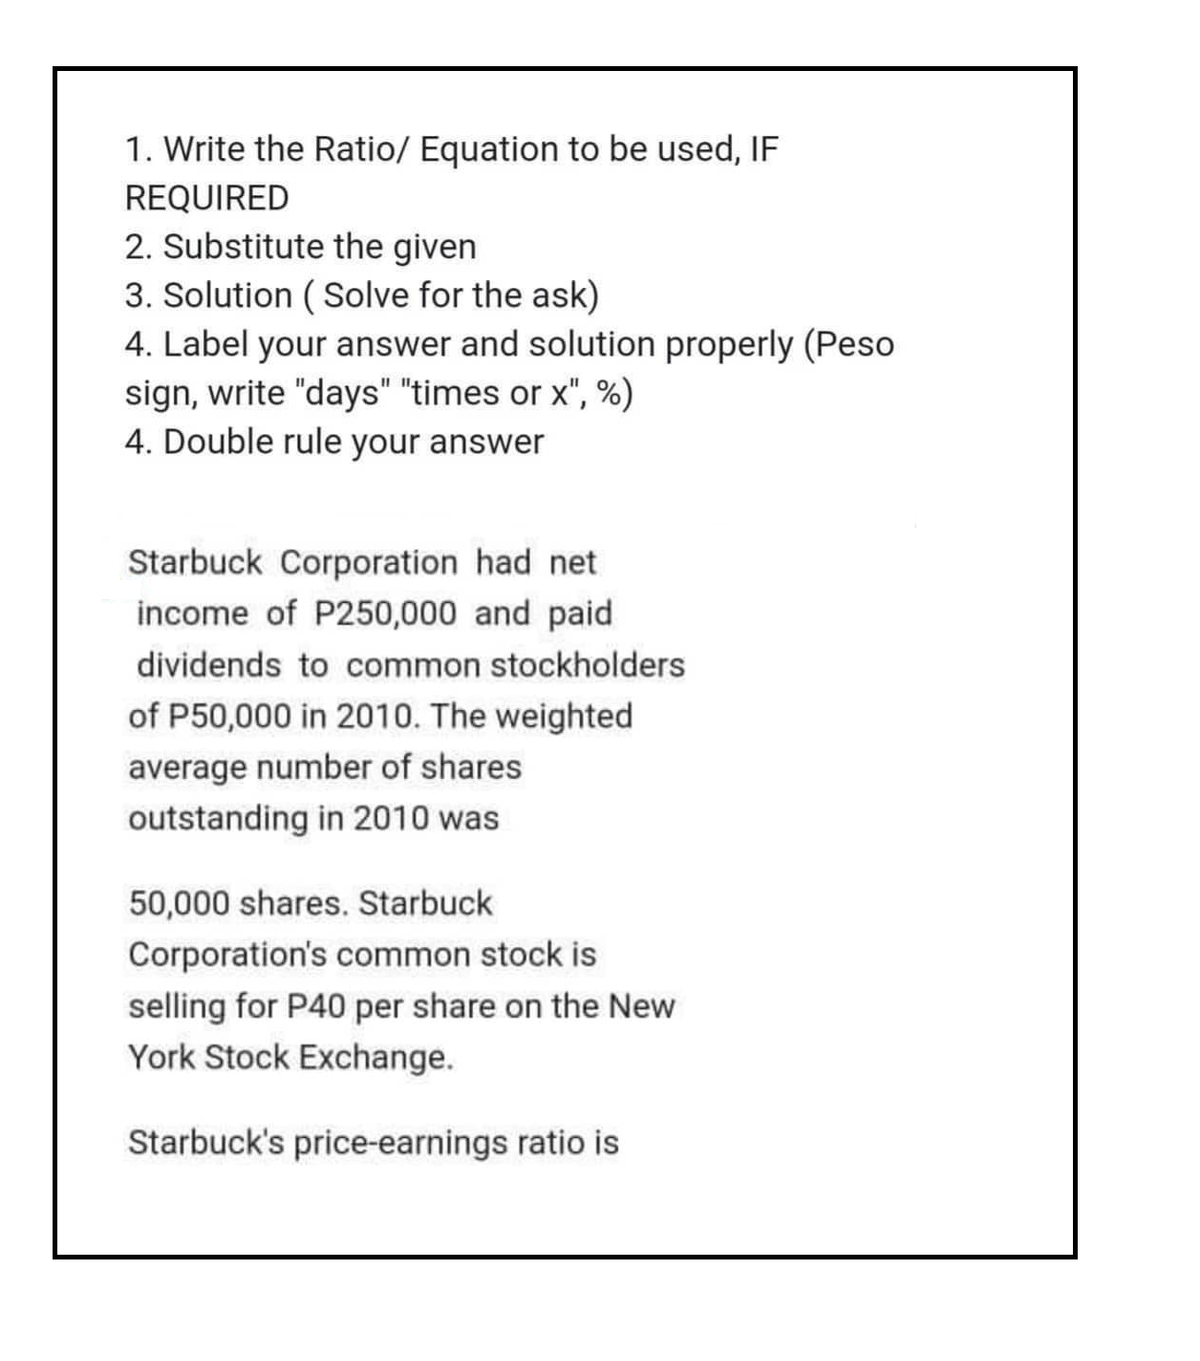 1. Write the Ratio/ Equation to be used, IF
REQUIRED
2. Substitute the given
3. Solution (Solve for the ask)
4. Label your answer and solution properly (Peso
sign, write "days" "times or x", %)
4. Double rule your answer
Starbuck Corporation had net
income of P250,000 and paid
dividends to common stockholders
of P50,000 in 2010. The weighted
average number of shares
outstanding in 2010 was
50,000 shares. Starbuck
Corporation's common stock is
selling for P40 per share on the New
York Stock Exchange.
Starbuck's price-earnings ratio is